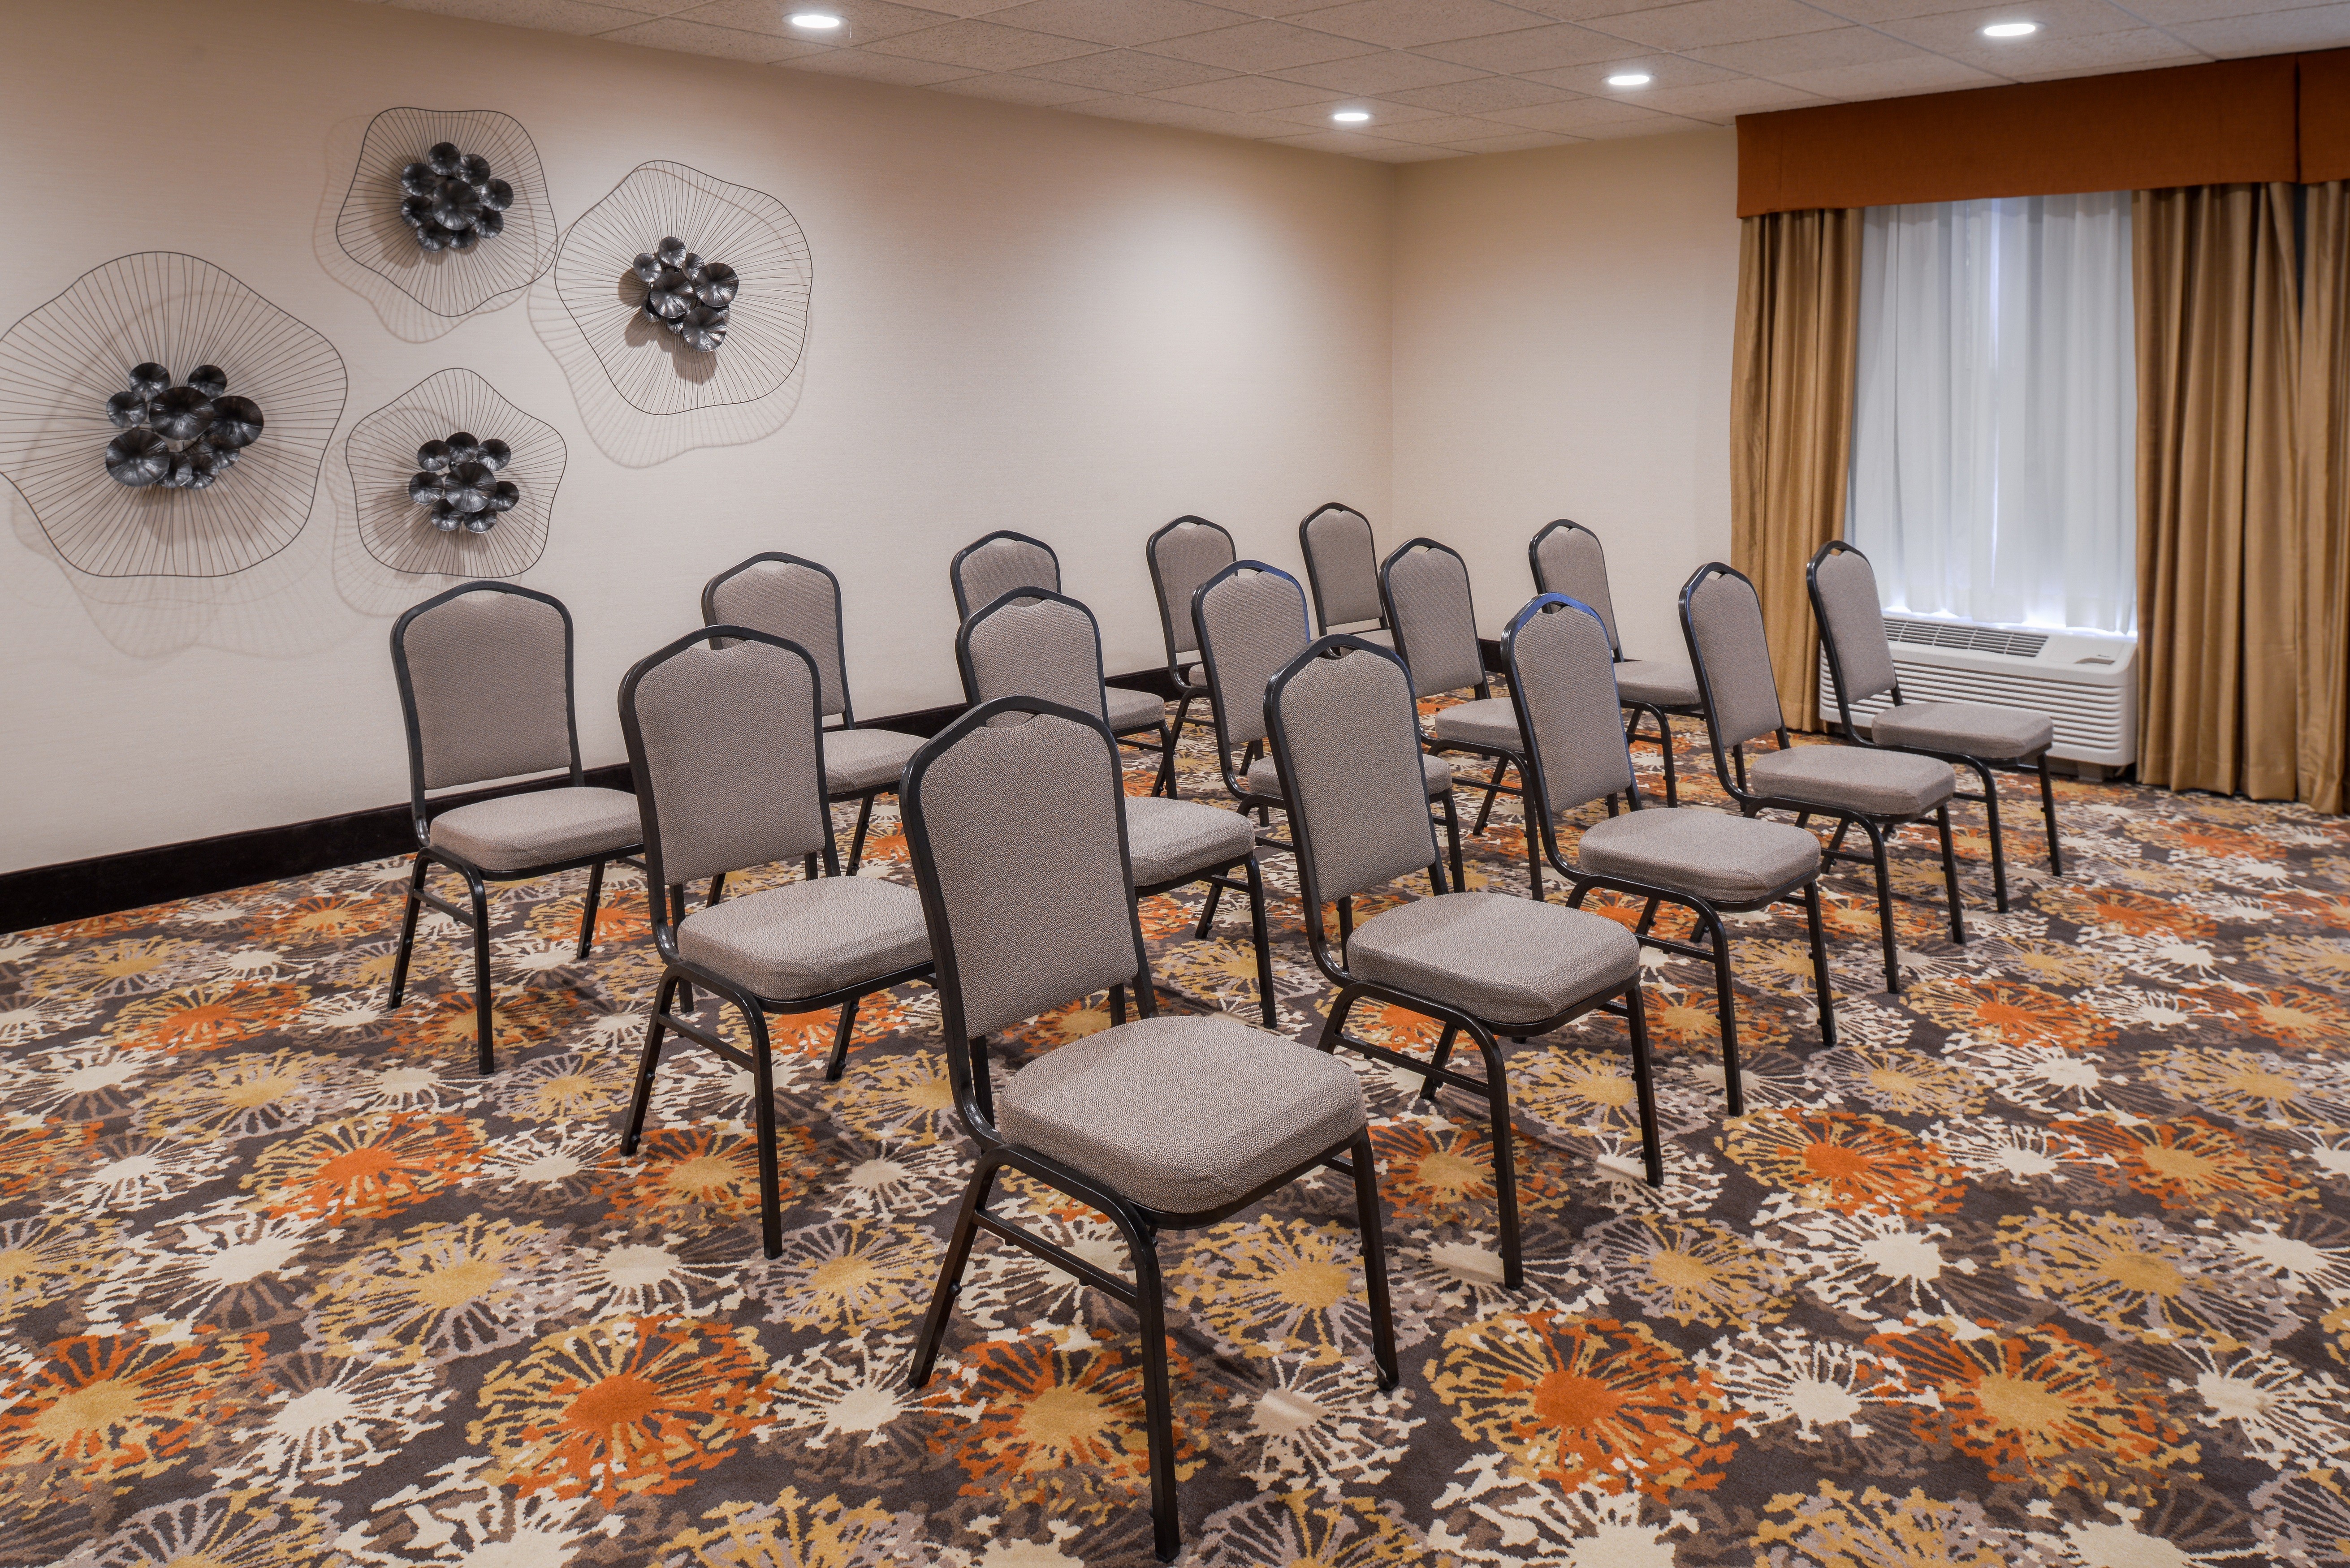 Meeting Room with Fifteen Chairs Set Up in Three Rows, a Diagonal View